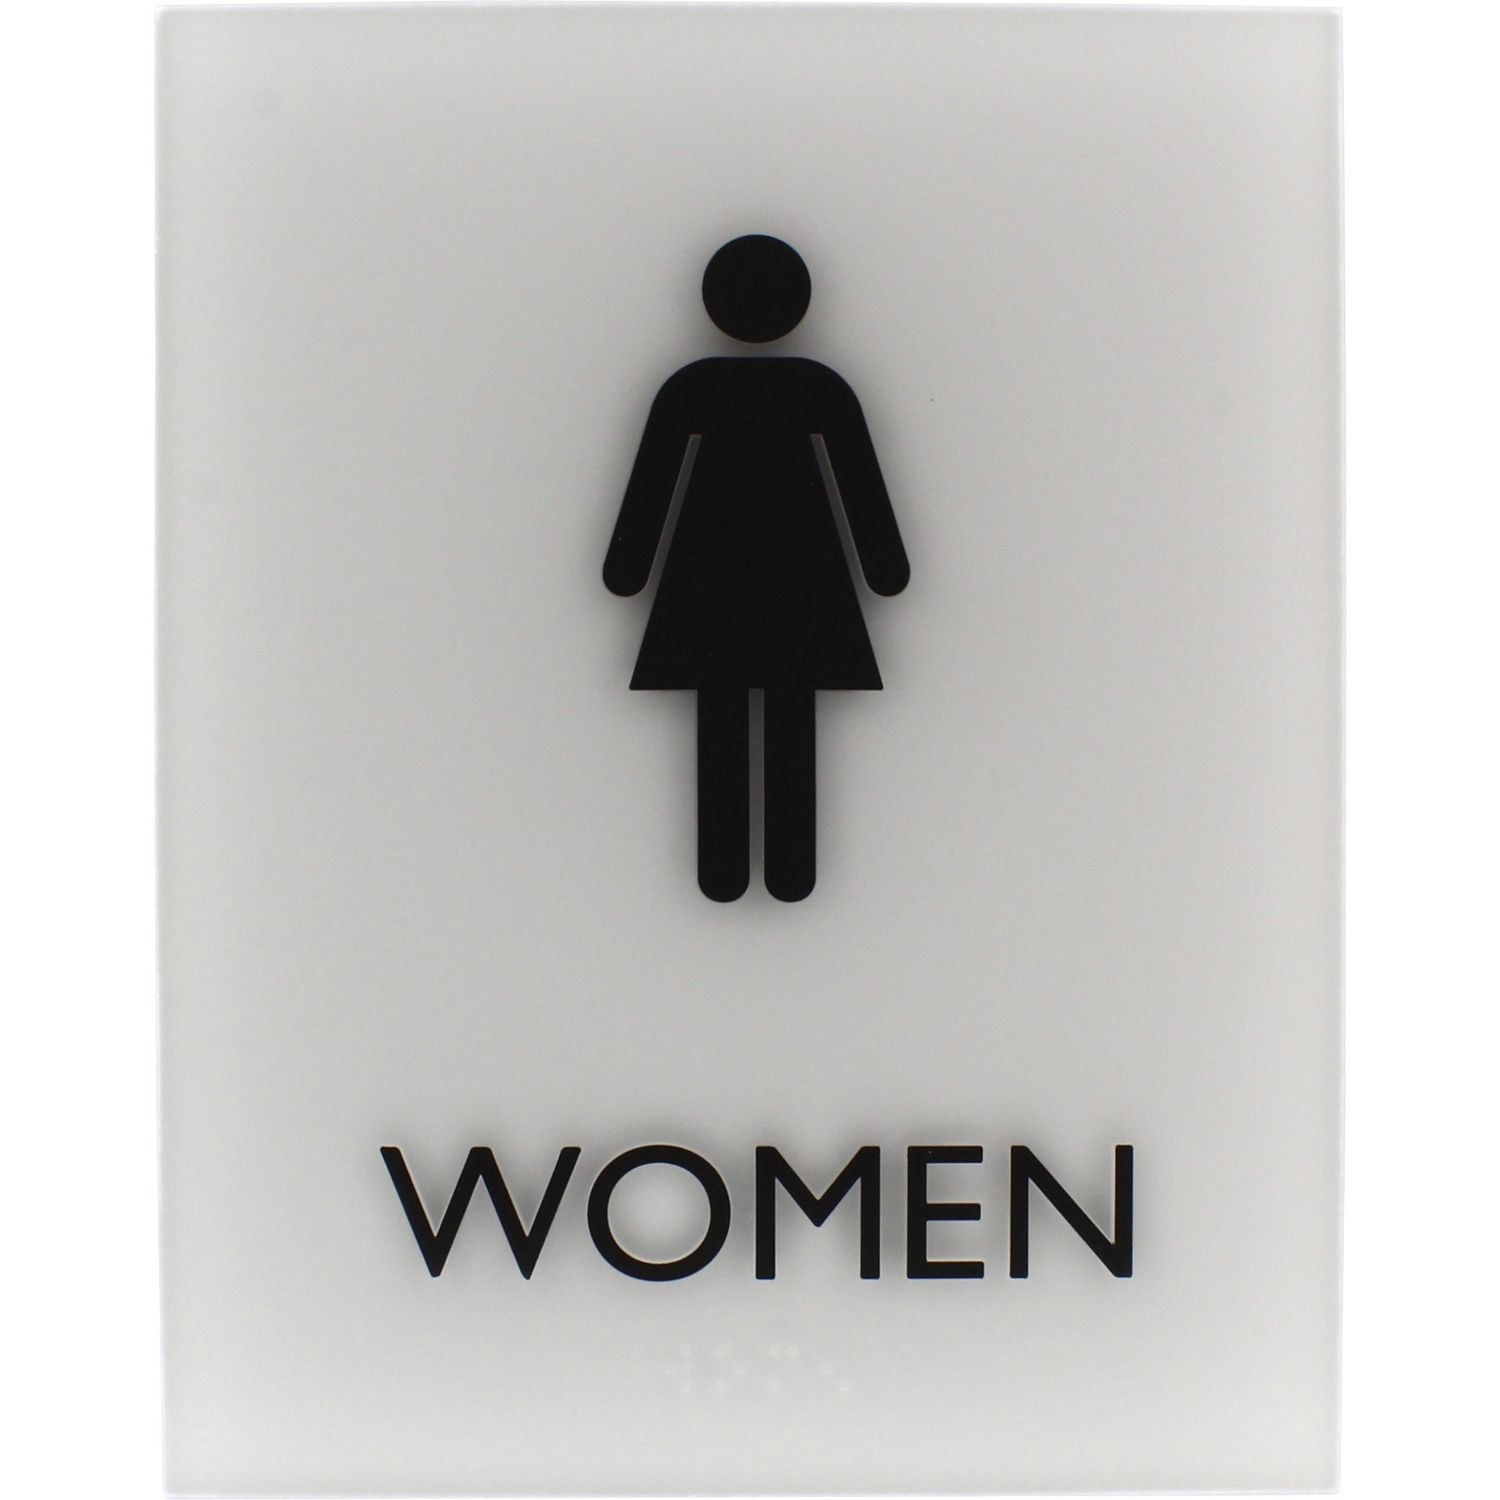 Restroom Sign 1 Each, Women Print/Message, 6.4" Width x 8.5" Height, Easy Readability, Braille, Light Gray